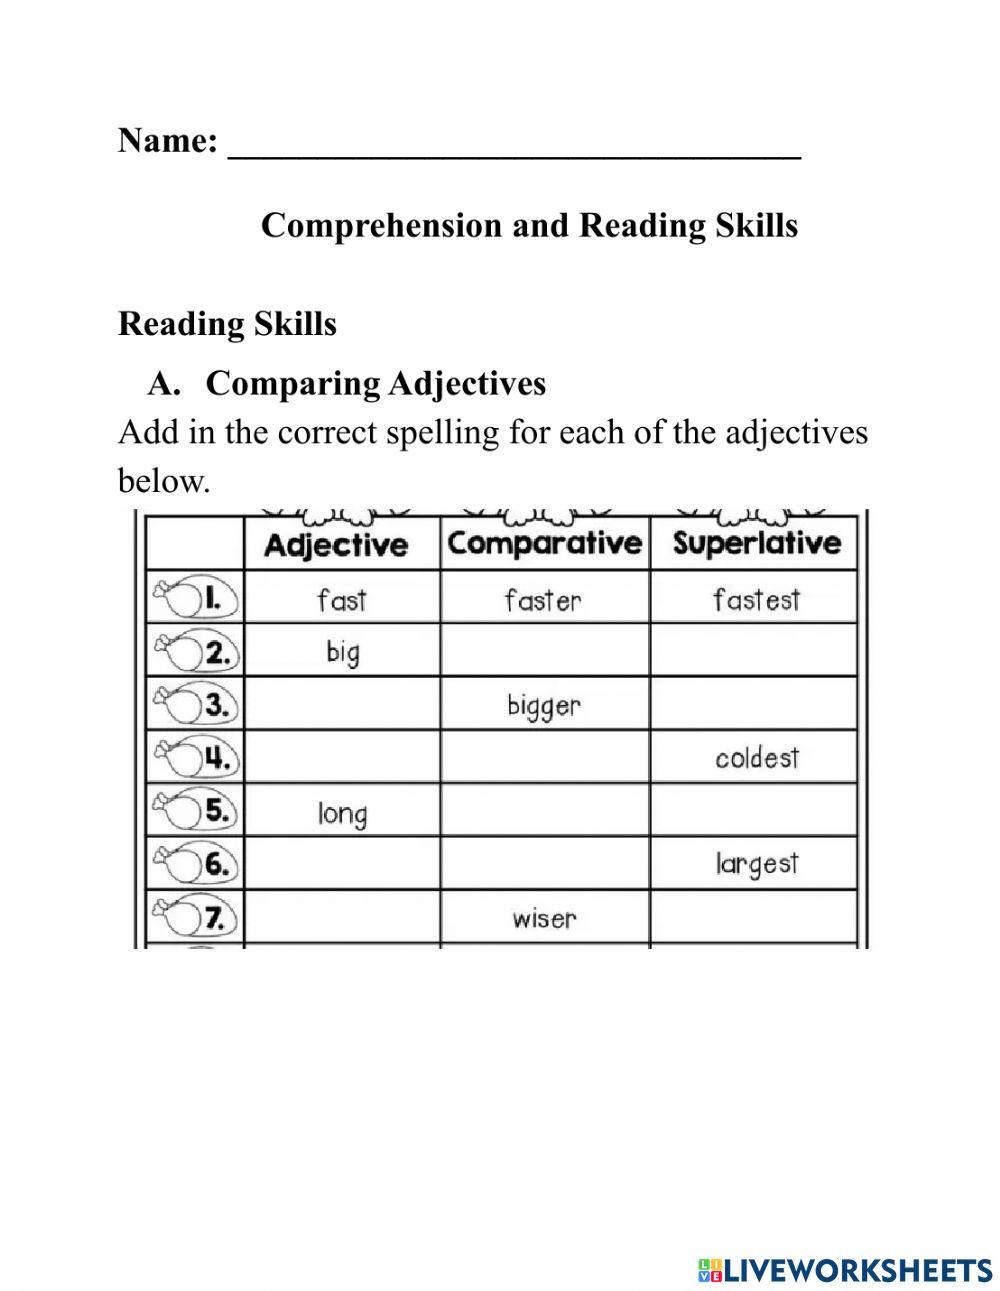 Comprehension and Reading Skills